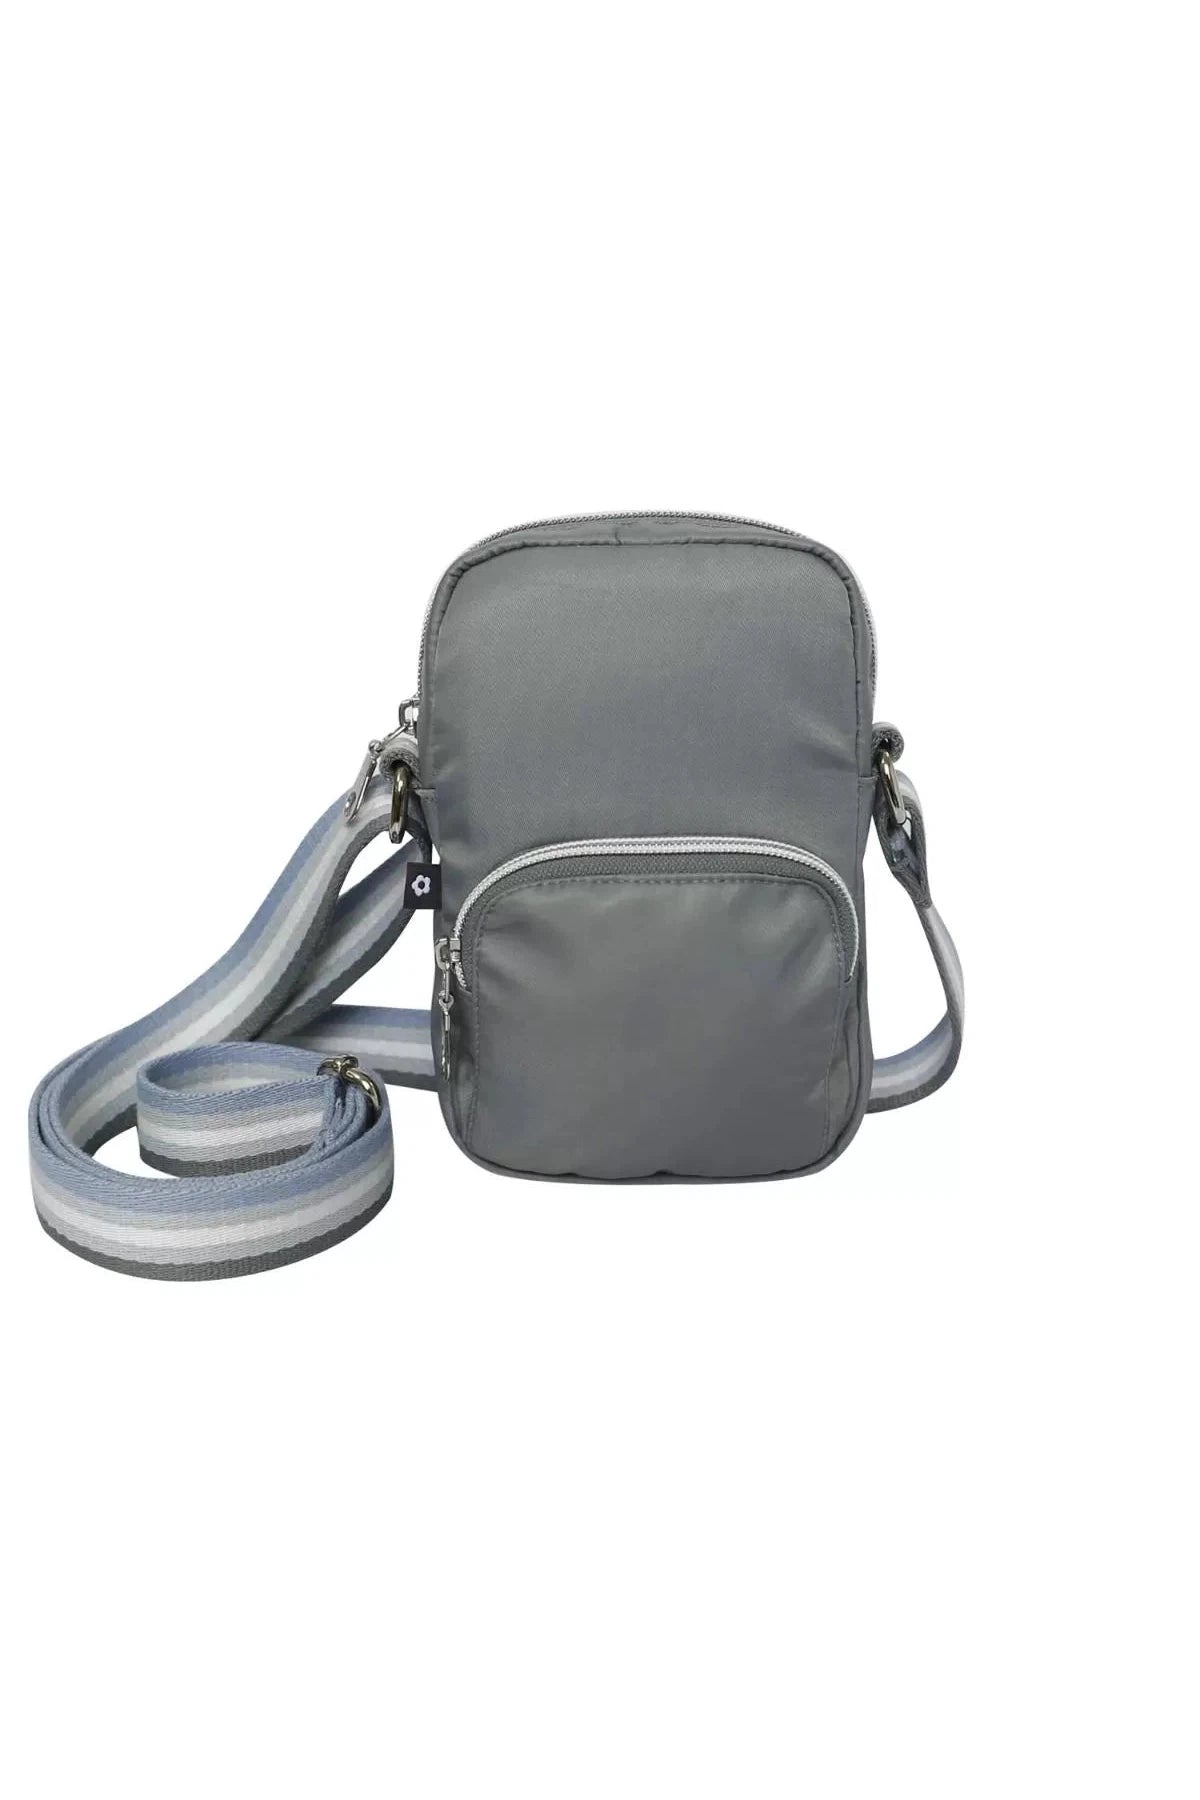 Earth Squared Recycled Voyage Mini Crossbody Ultimate Grey Pouch Bag-Womens-Ohh! By Gum - Shop Sustainable